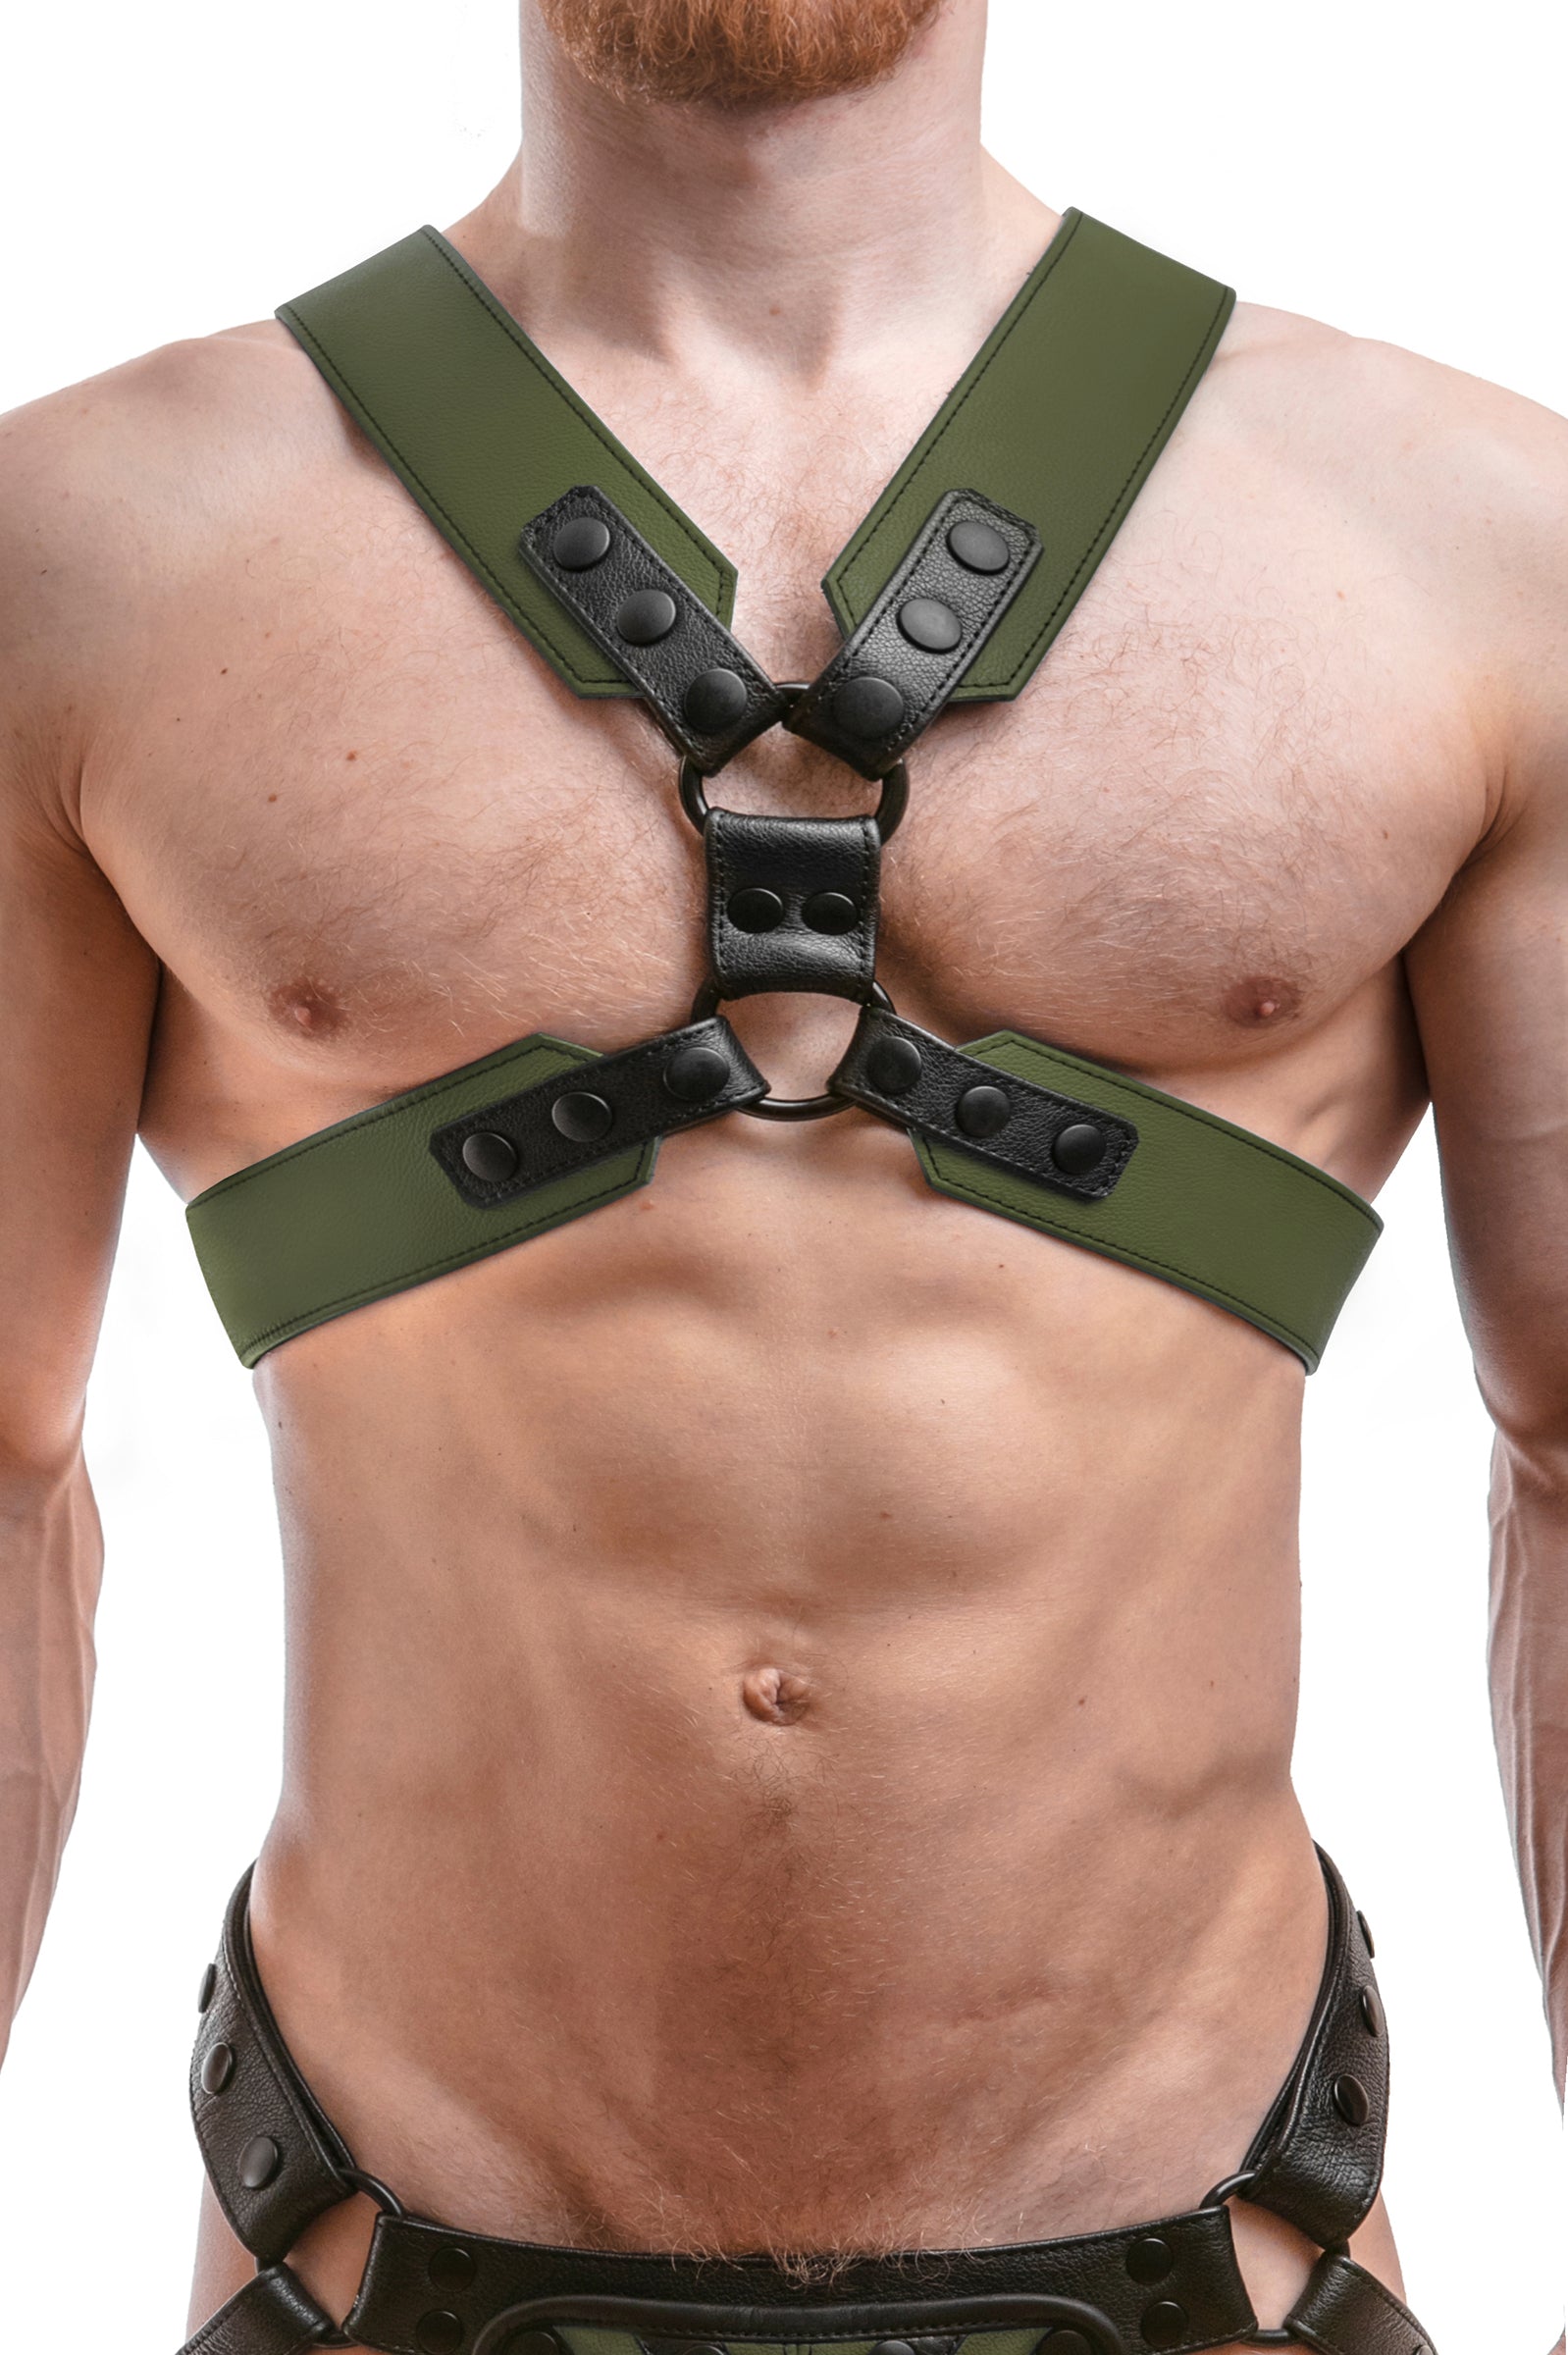 Mens Harness Leather Body Harness Men Chest Harness Fashion 